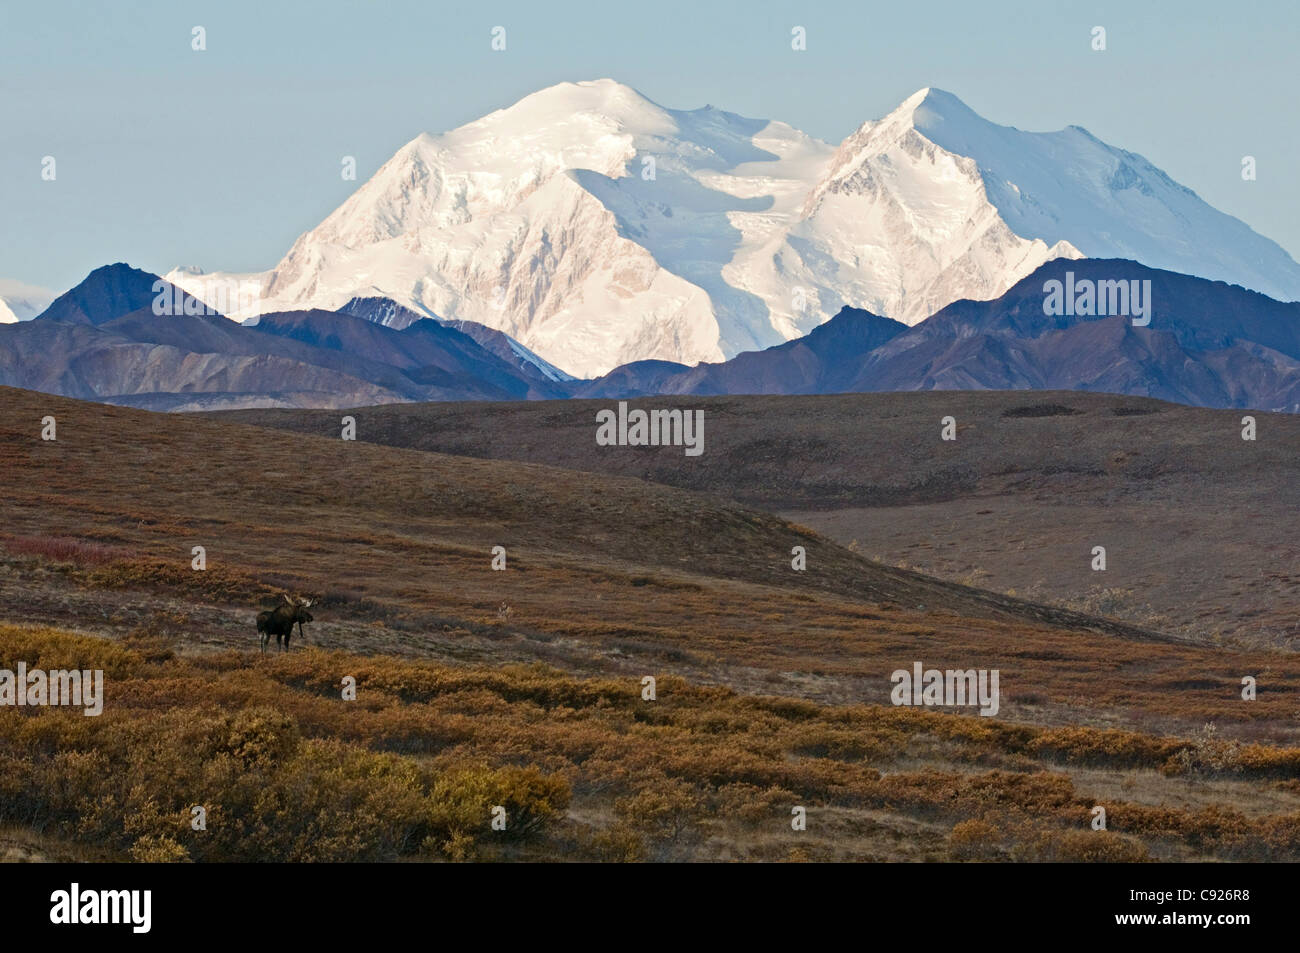 Adult bull moose standing on tundra in Sable Pass with Mt. McKinley in the background, Denali National Park, Alaska, Autumn Stock Photo